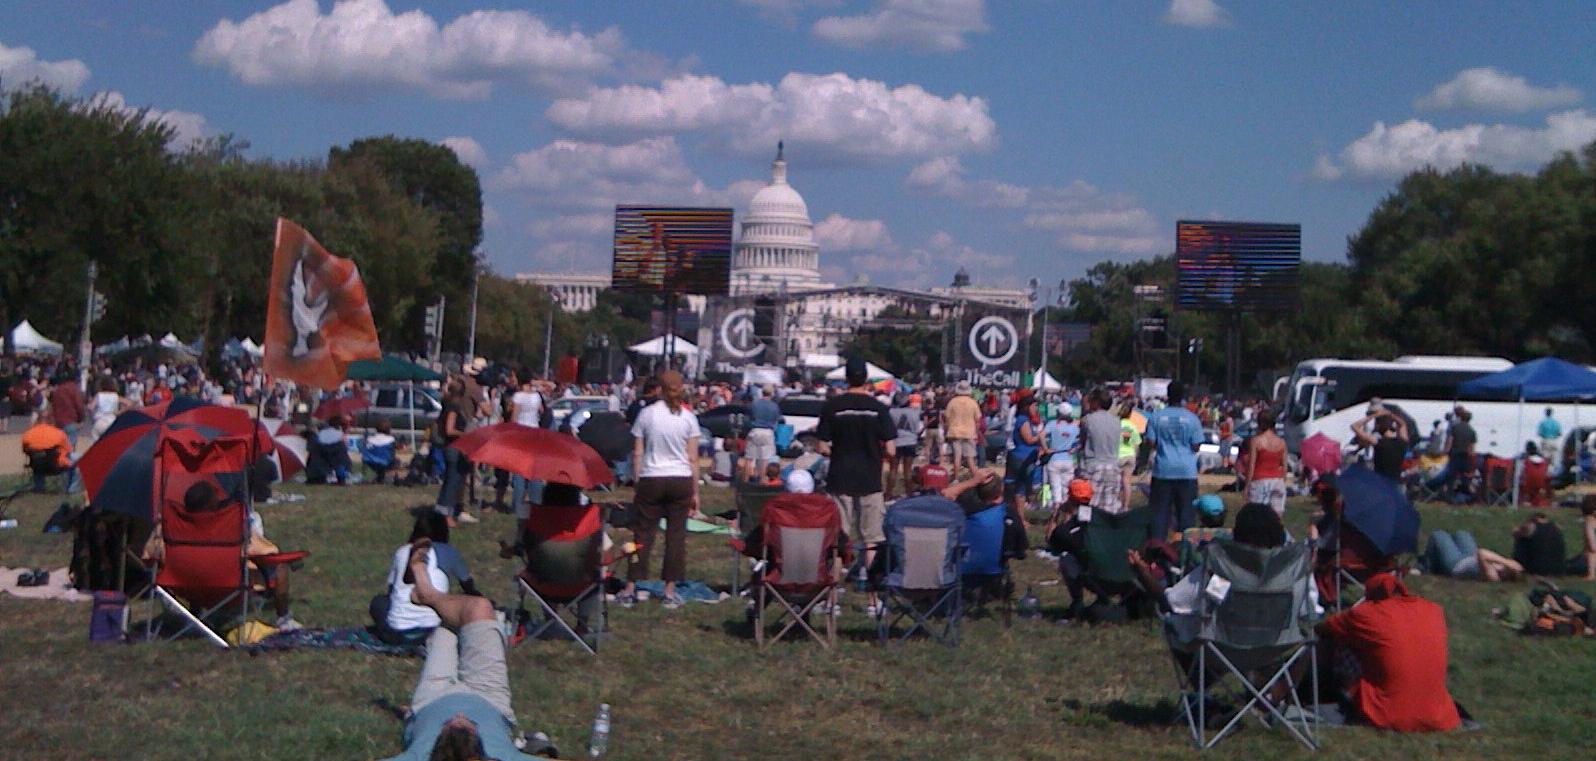 People standing in a field sporadically in front of the D.C capitol